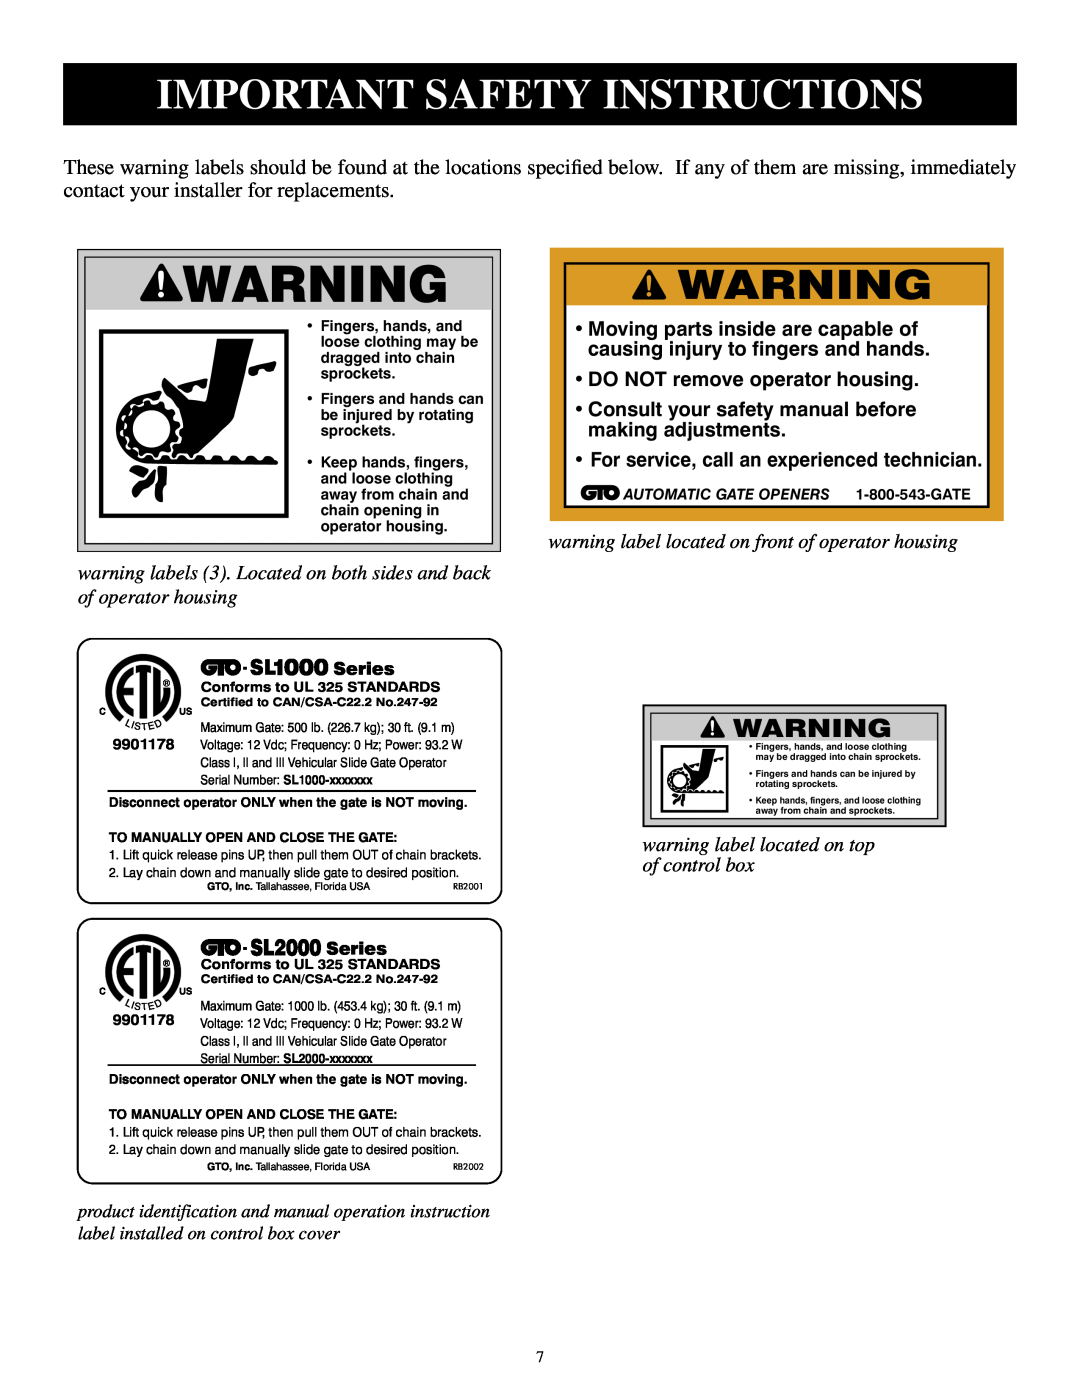 GTO SL-2000B Important Safety Instructions, warning labels 3. Located on both sides and back of operator housing, Series 